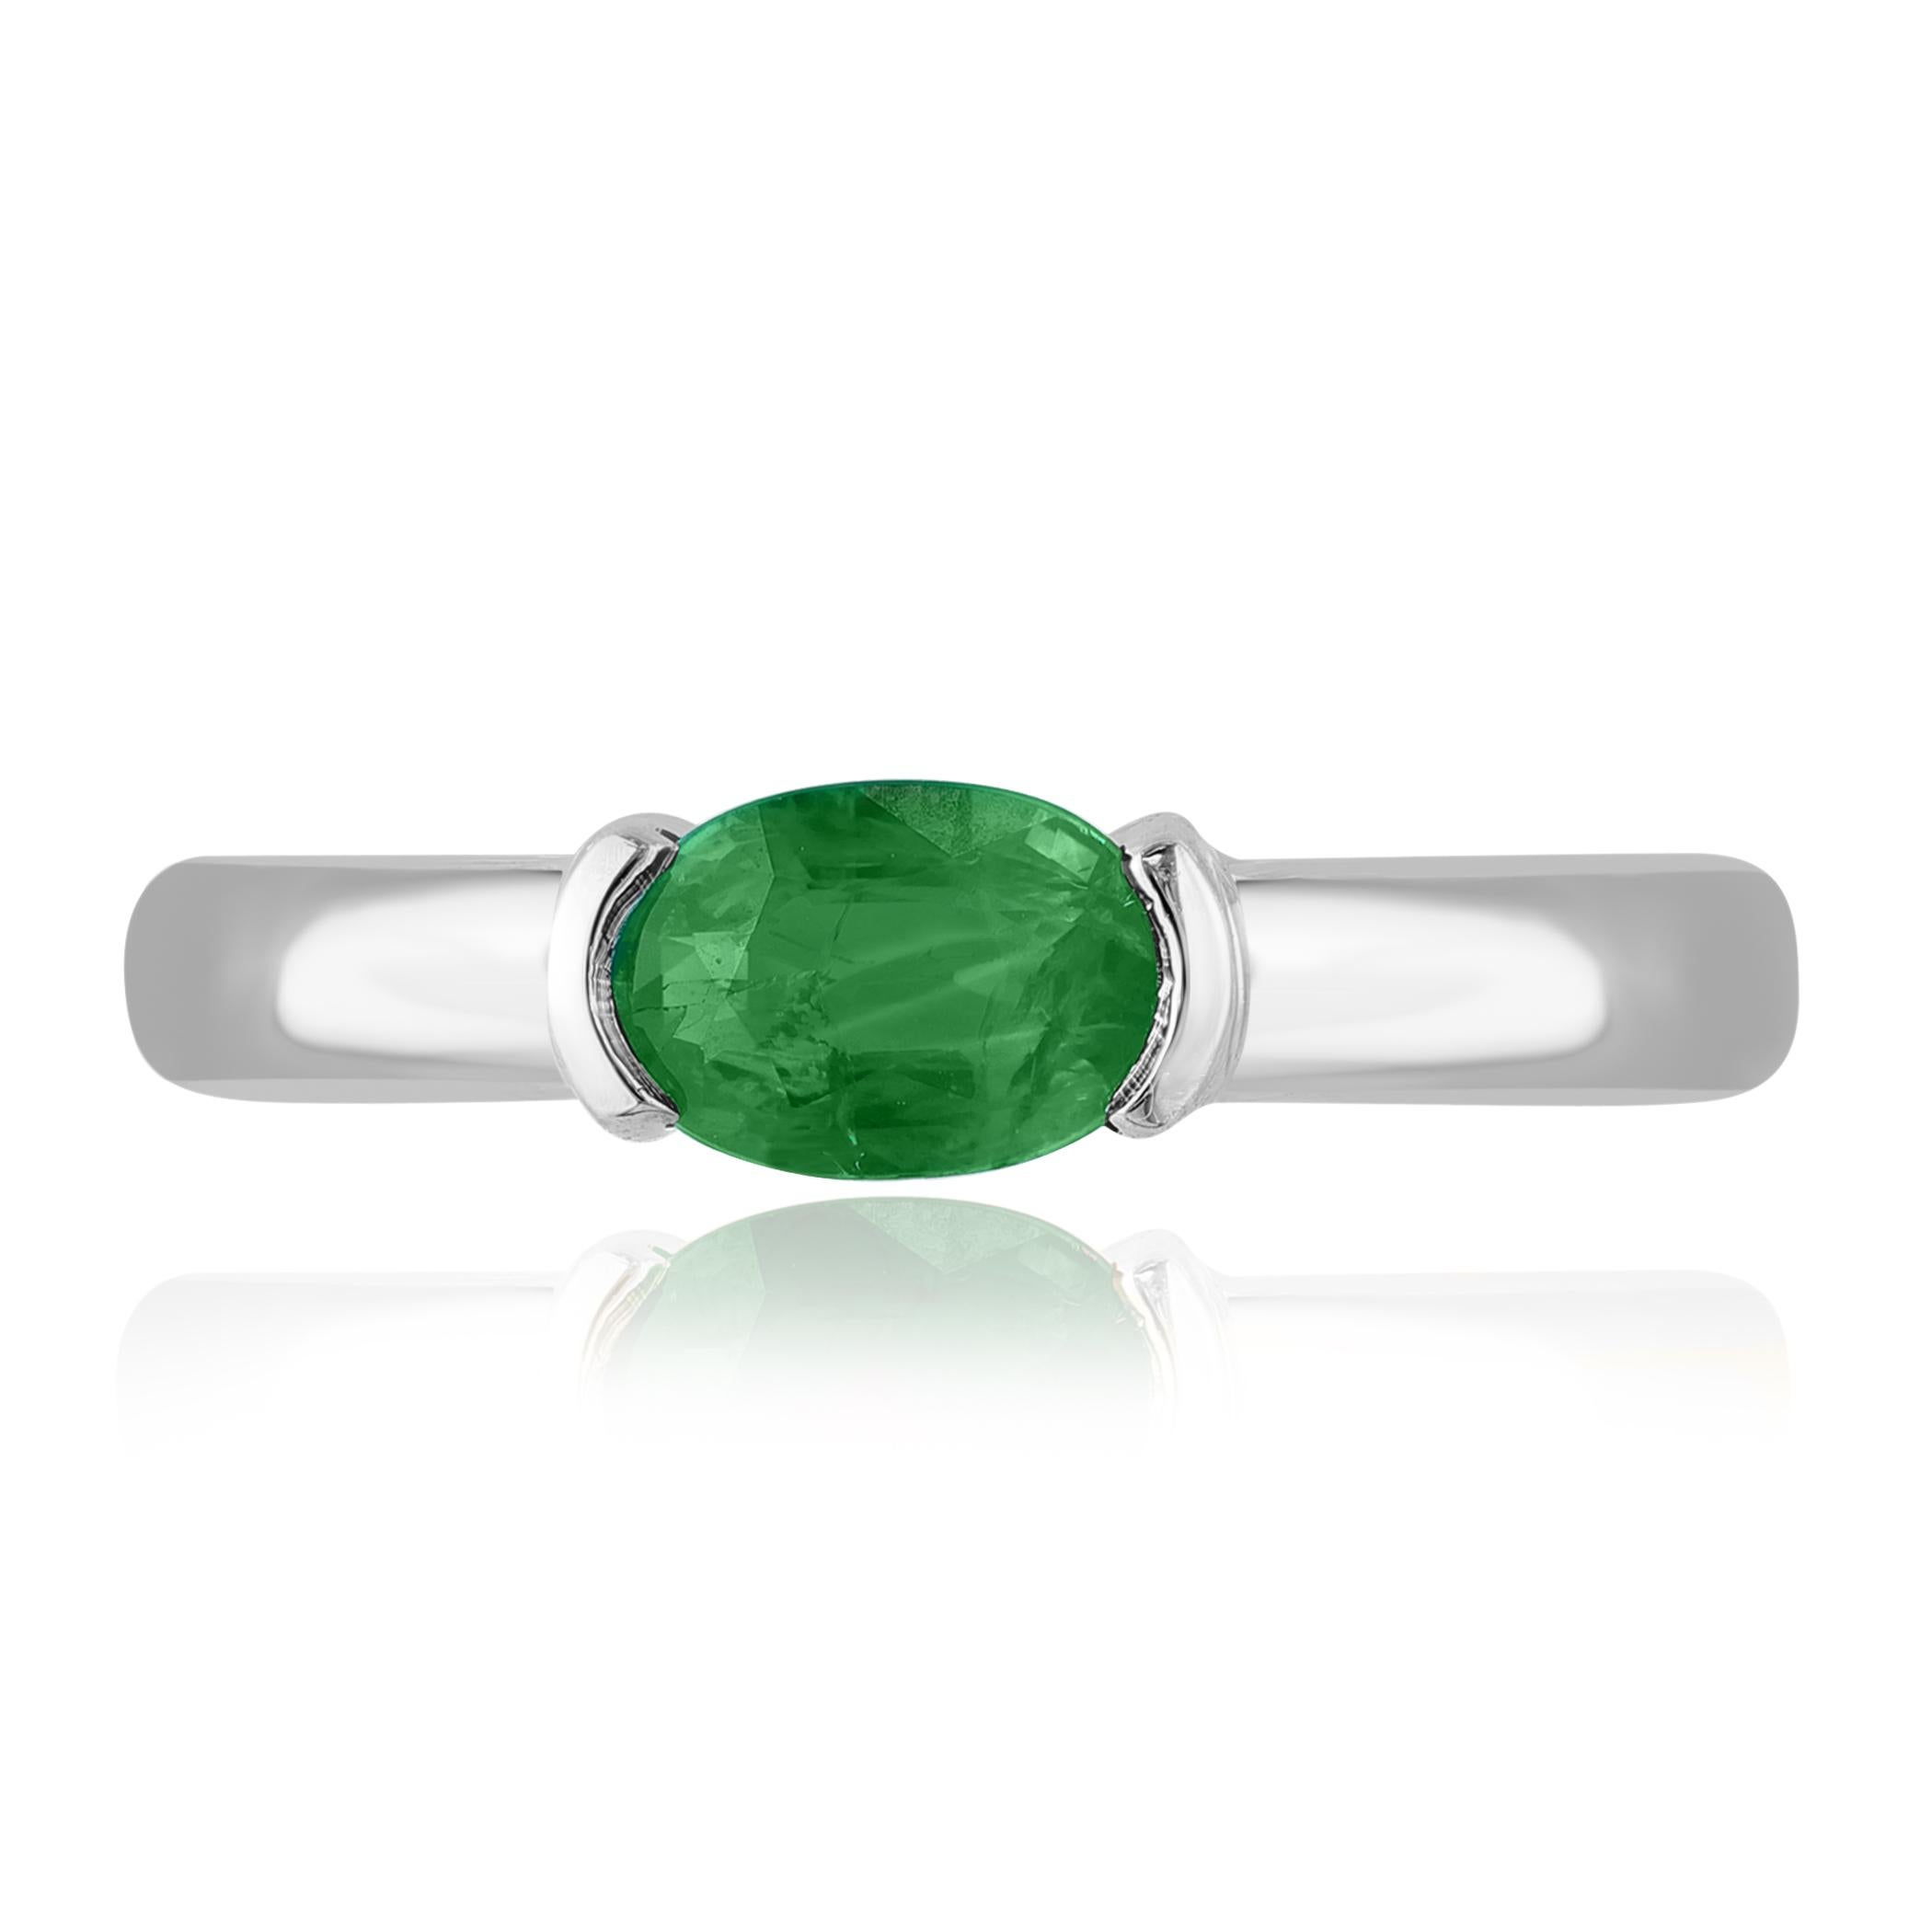 An elegant wedding band ring featuring an astonishing 0.77-carat oval cut emerald, set in a beautiful wide 14K white gold band. 

Style is available in different price ranges. Prices are based on your selection. Don't hesitate to get in touch with